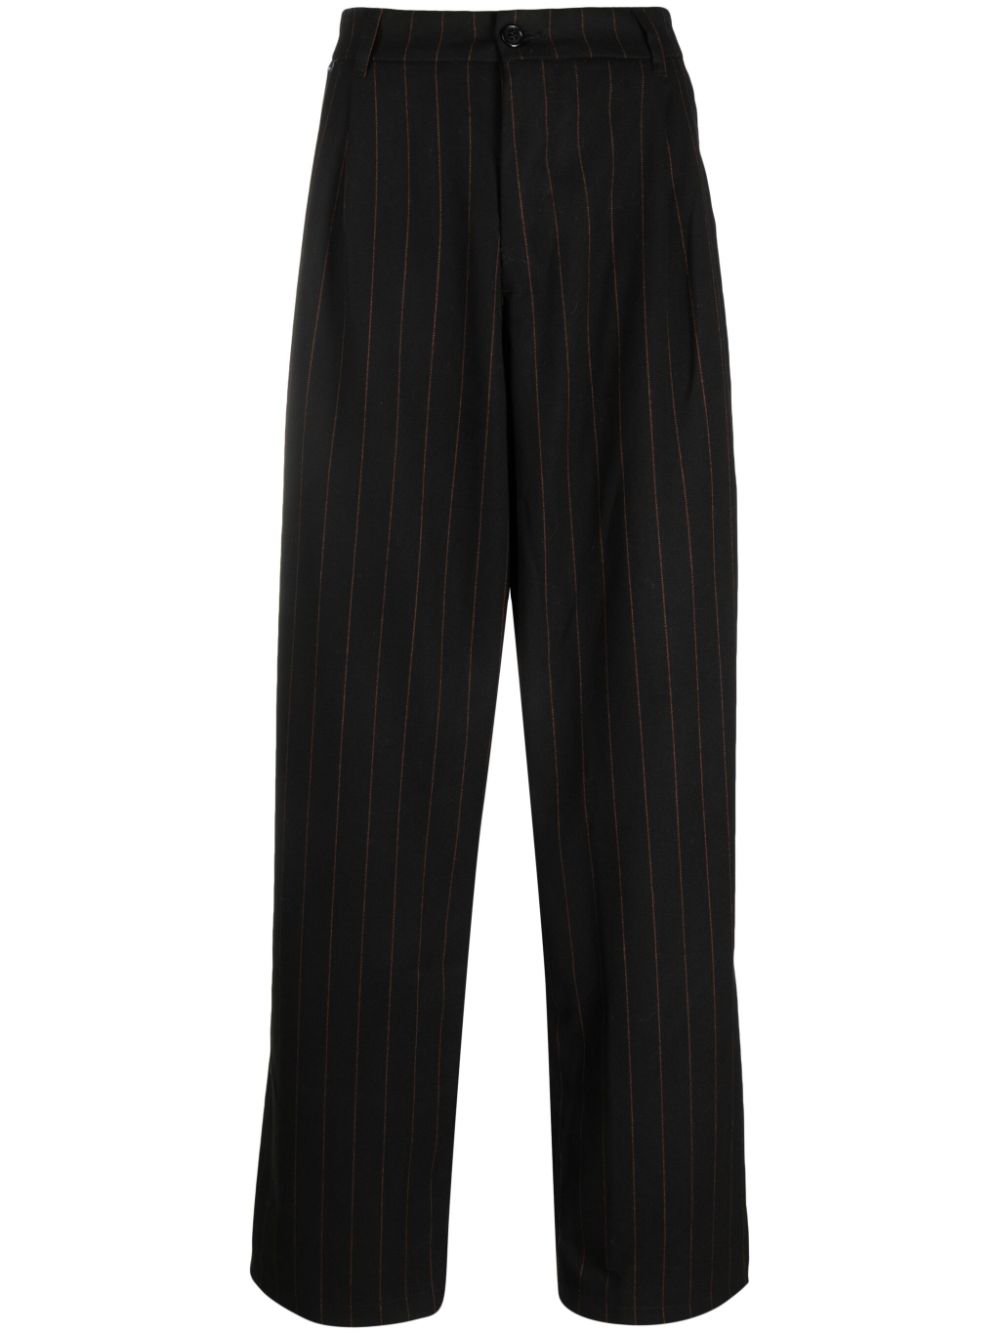 FAMILY FIRST STRAIGHT-LEG PINSTRIPE-PATTERN TROUSERS